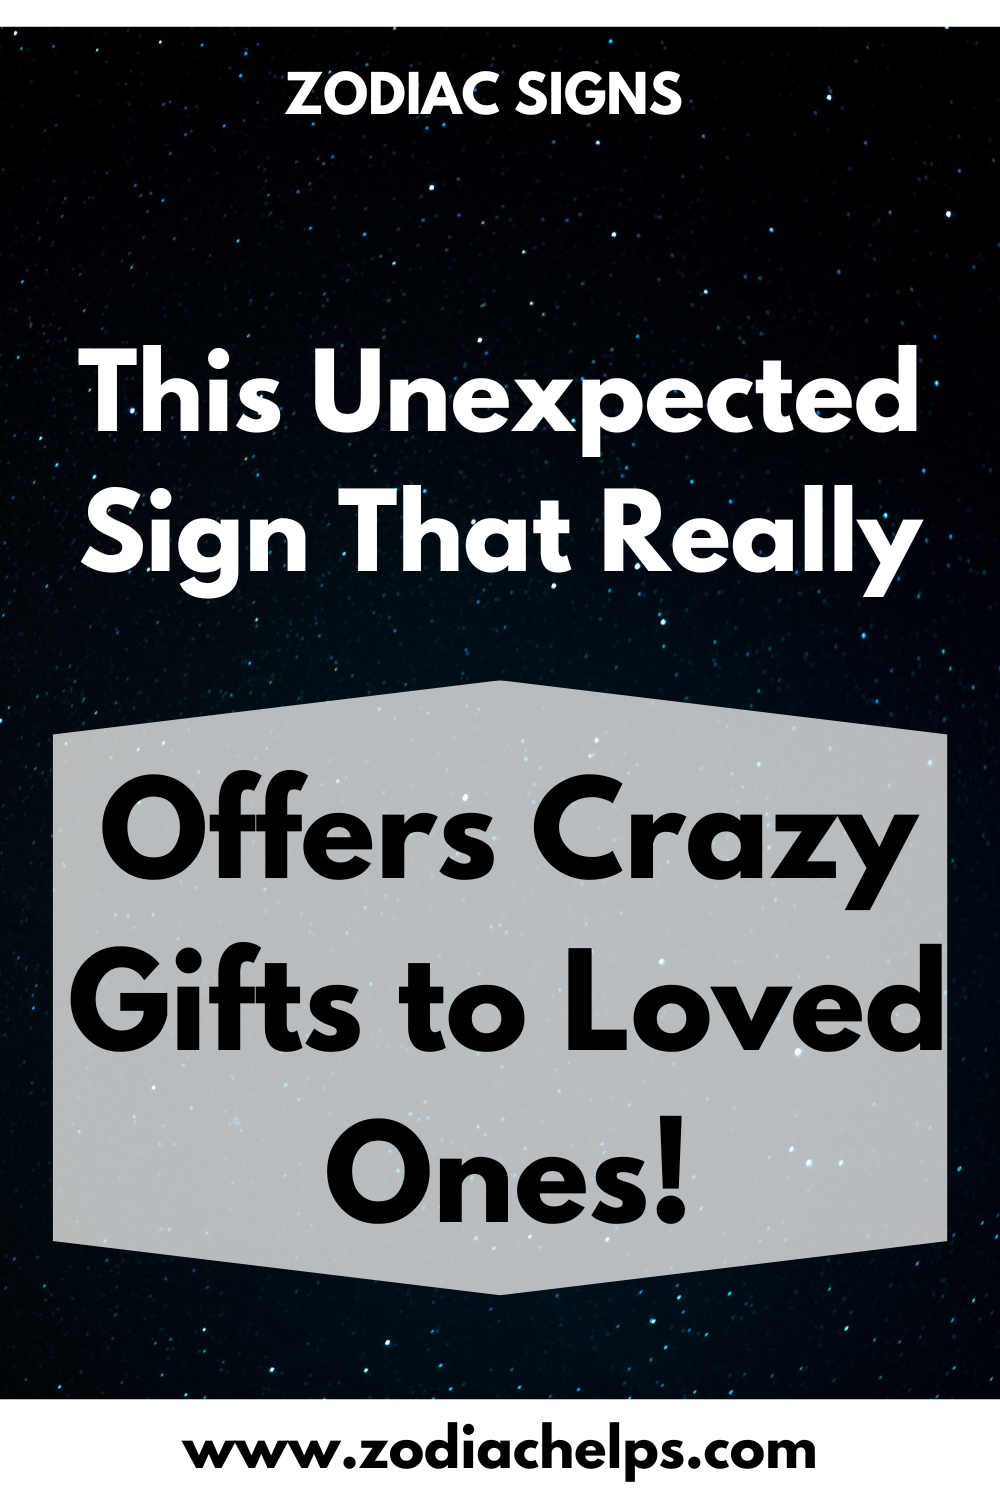 This Unexpected Sign That Really Offers Crazy Gifts to Loved Ones!